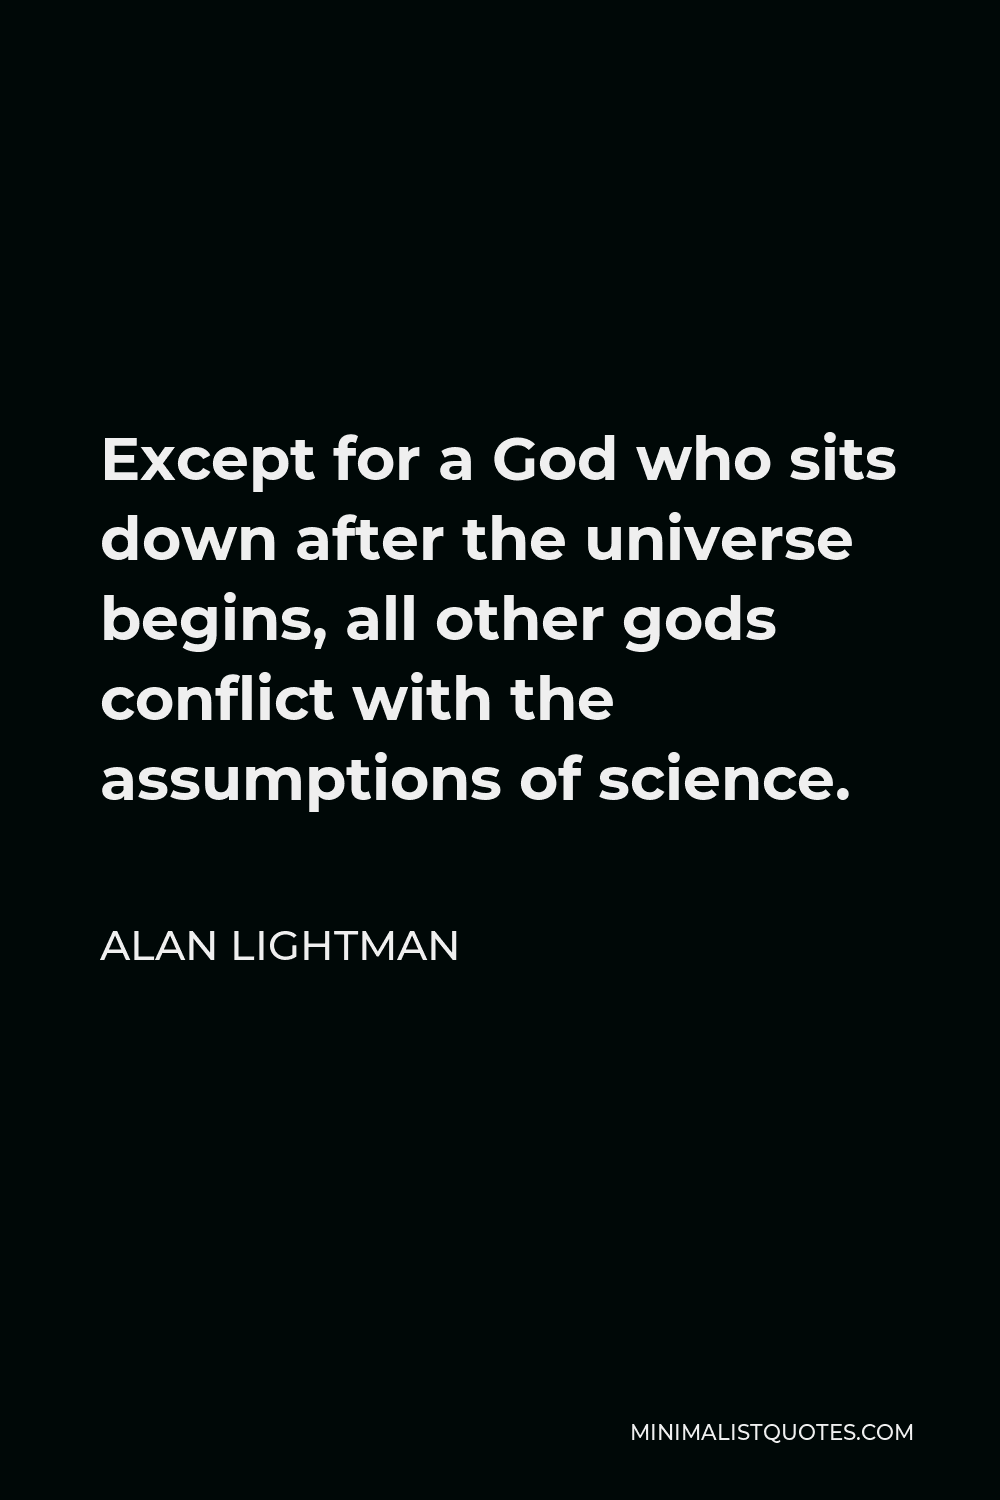 Alan Lightman Quote - Except for a God who sits down after the universe begins, all other gods conflict with the assumptions of science.